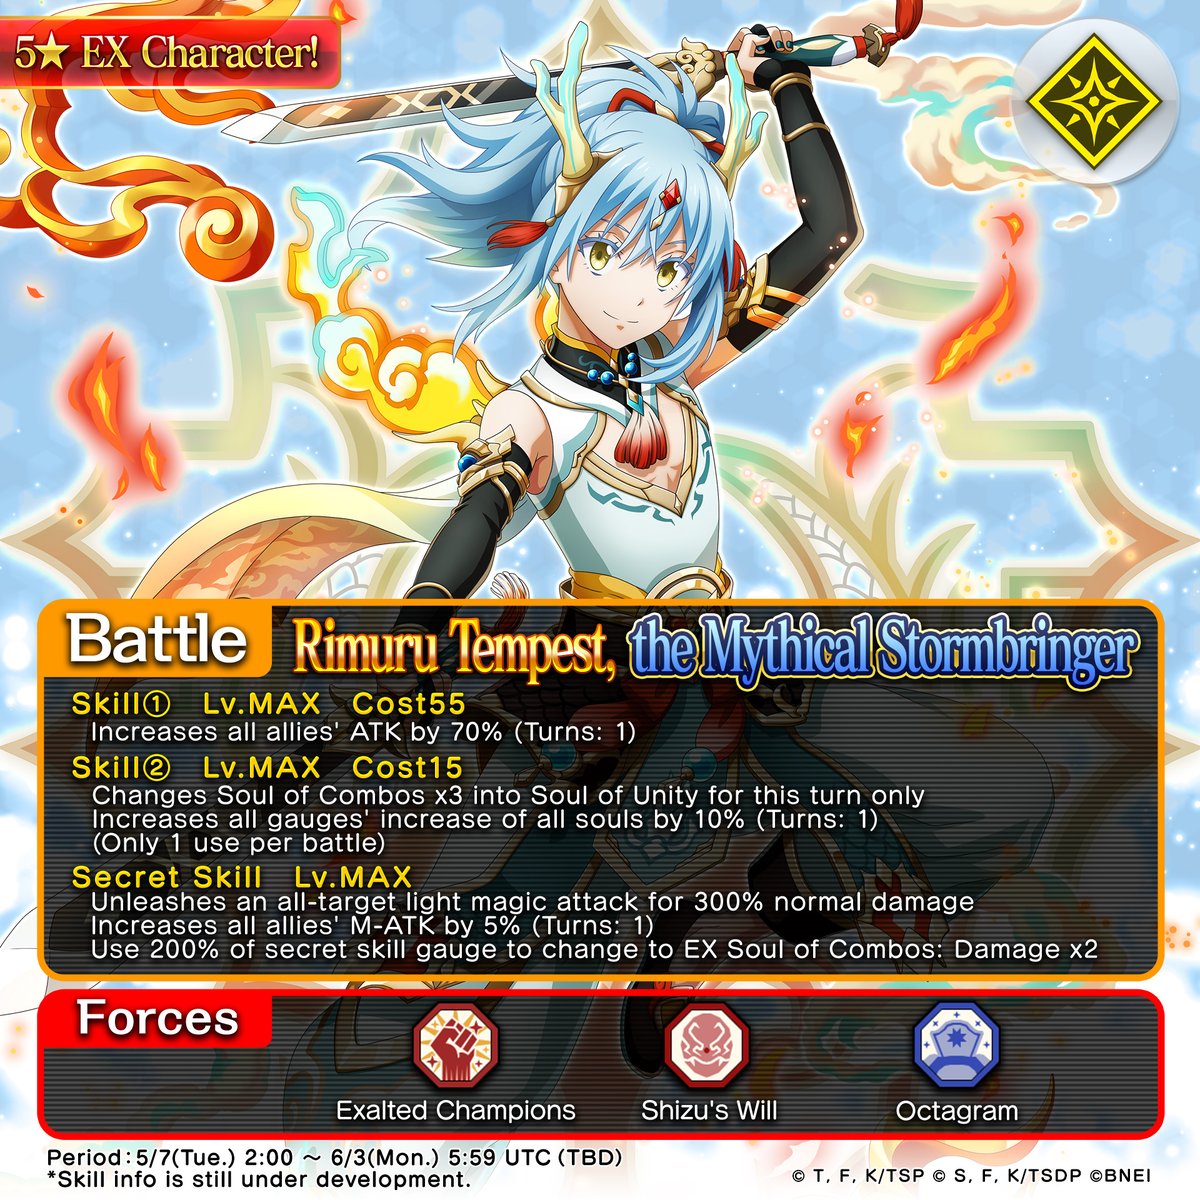 🐉Troop Recruit: 2.5th Anniversary Super Isekai Revelry Part 3🐉

The new Rimuru Tempest appears at a higher rate than usual!🌟
 
#SlimeIM #tensura